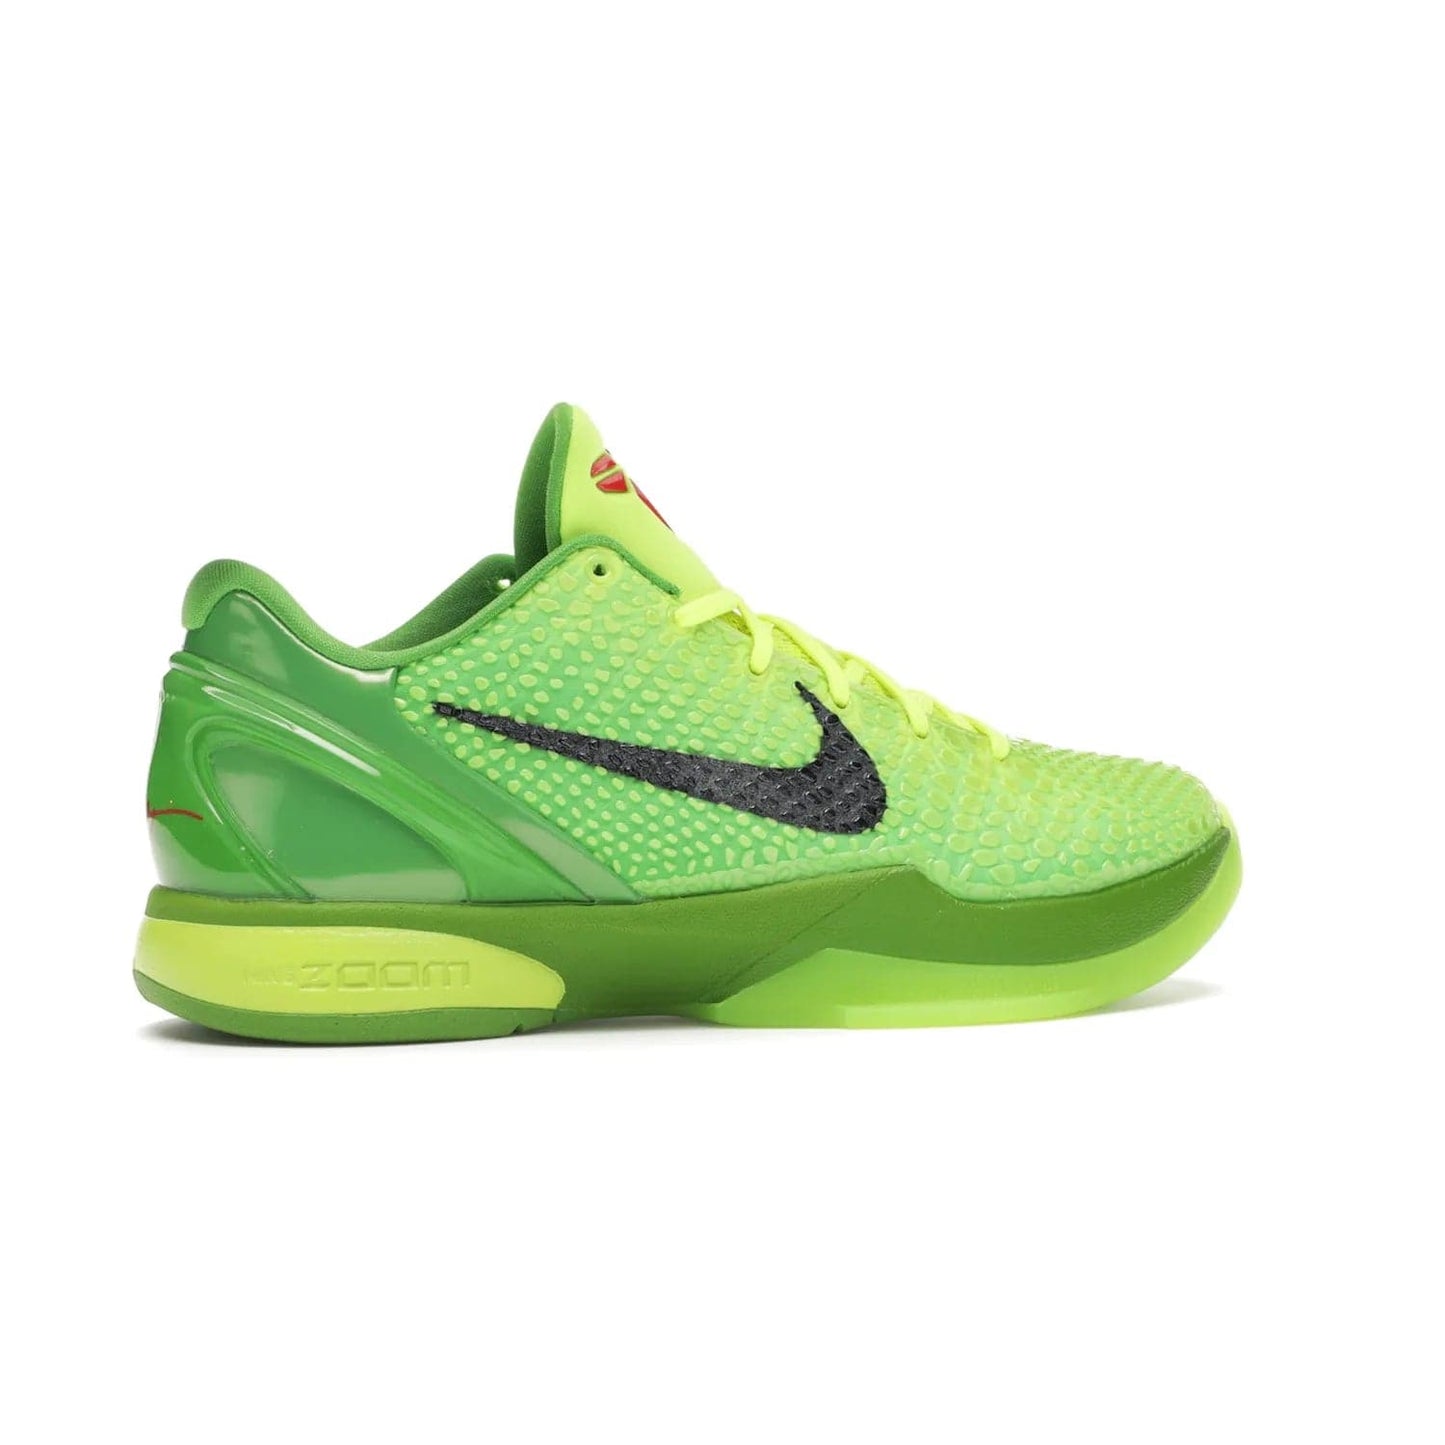 Nike Kobe 6 Protro Grinch (2020) - Image 35 - Only at www.BallersClubKickz.com - #
The Nike Kobe 6 Protro Grinch updates the iconic 2011 design with modern tech like a Zoom Air cushioning system, scaled-down traction, and updated silhouette. Experience the textured Green Apple and Volt upper plus bright red and green accents for $180.